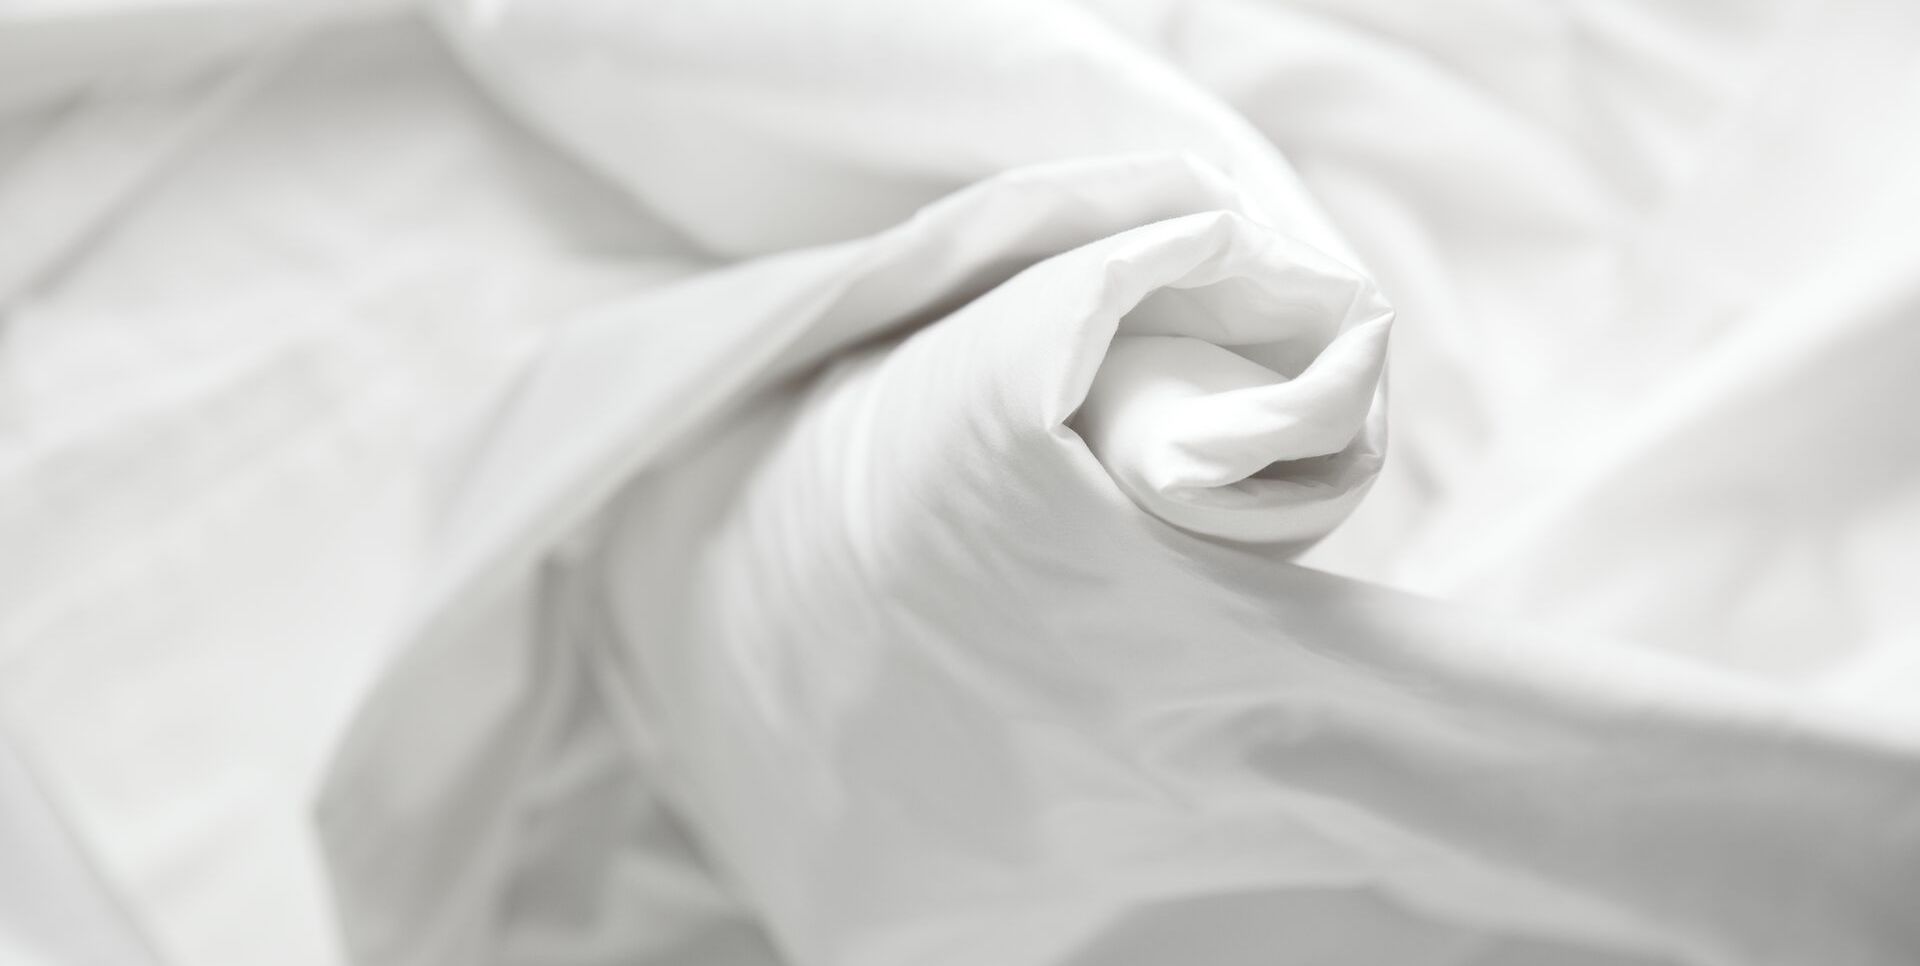 How to Whiten Sheets: Step-by-Step Instructions